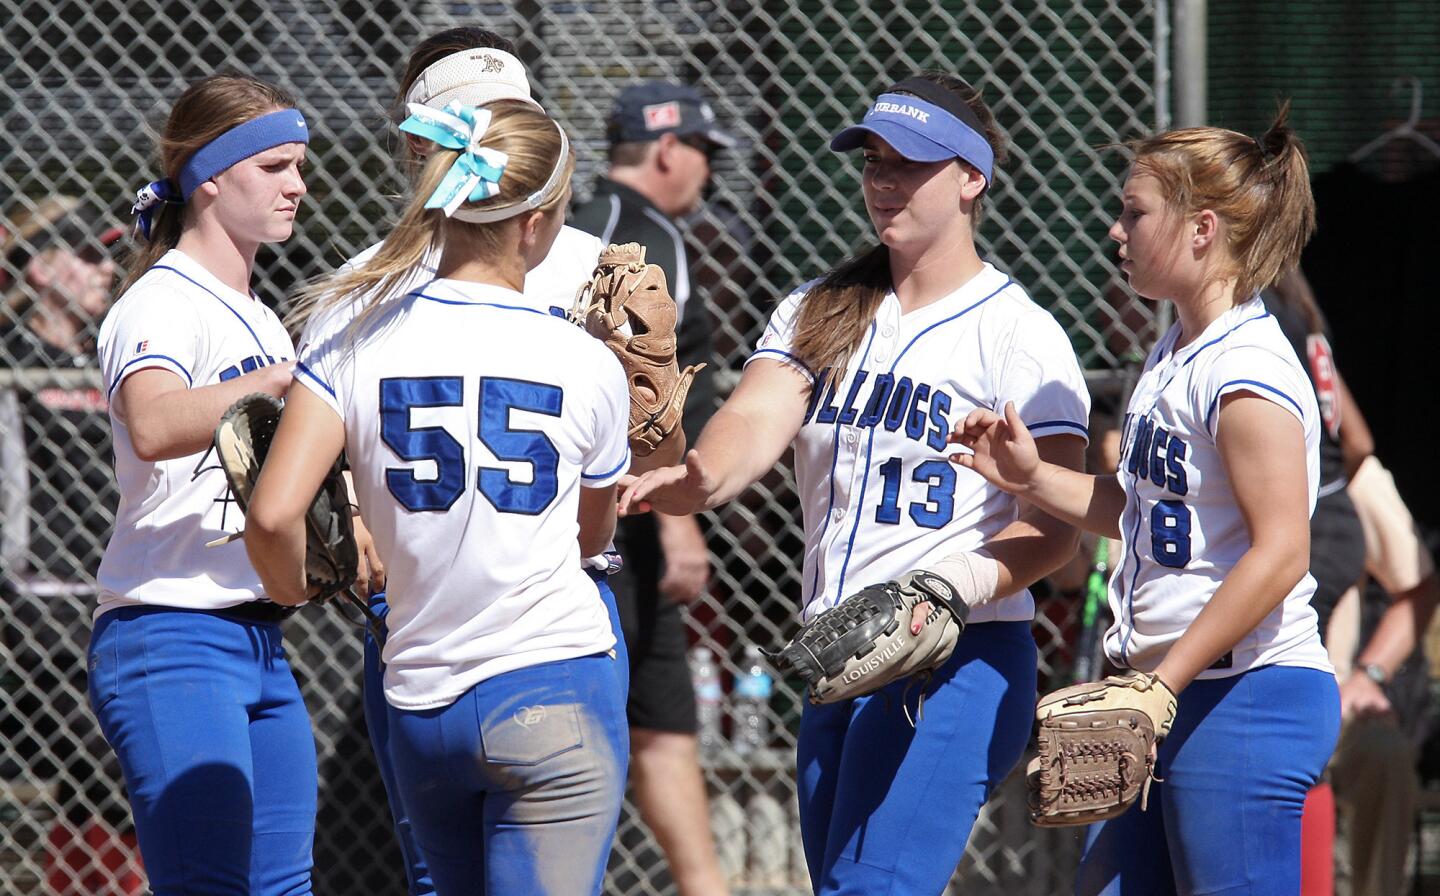 Burbank pitcher Caitlyn Brooks gets congratulated by her teammates after striking out a Glendale player during a game on Tuesday, May 13, 2014.